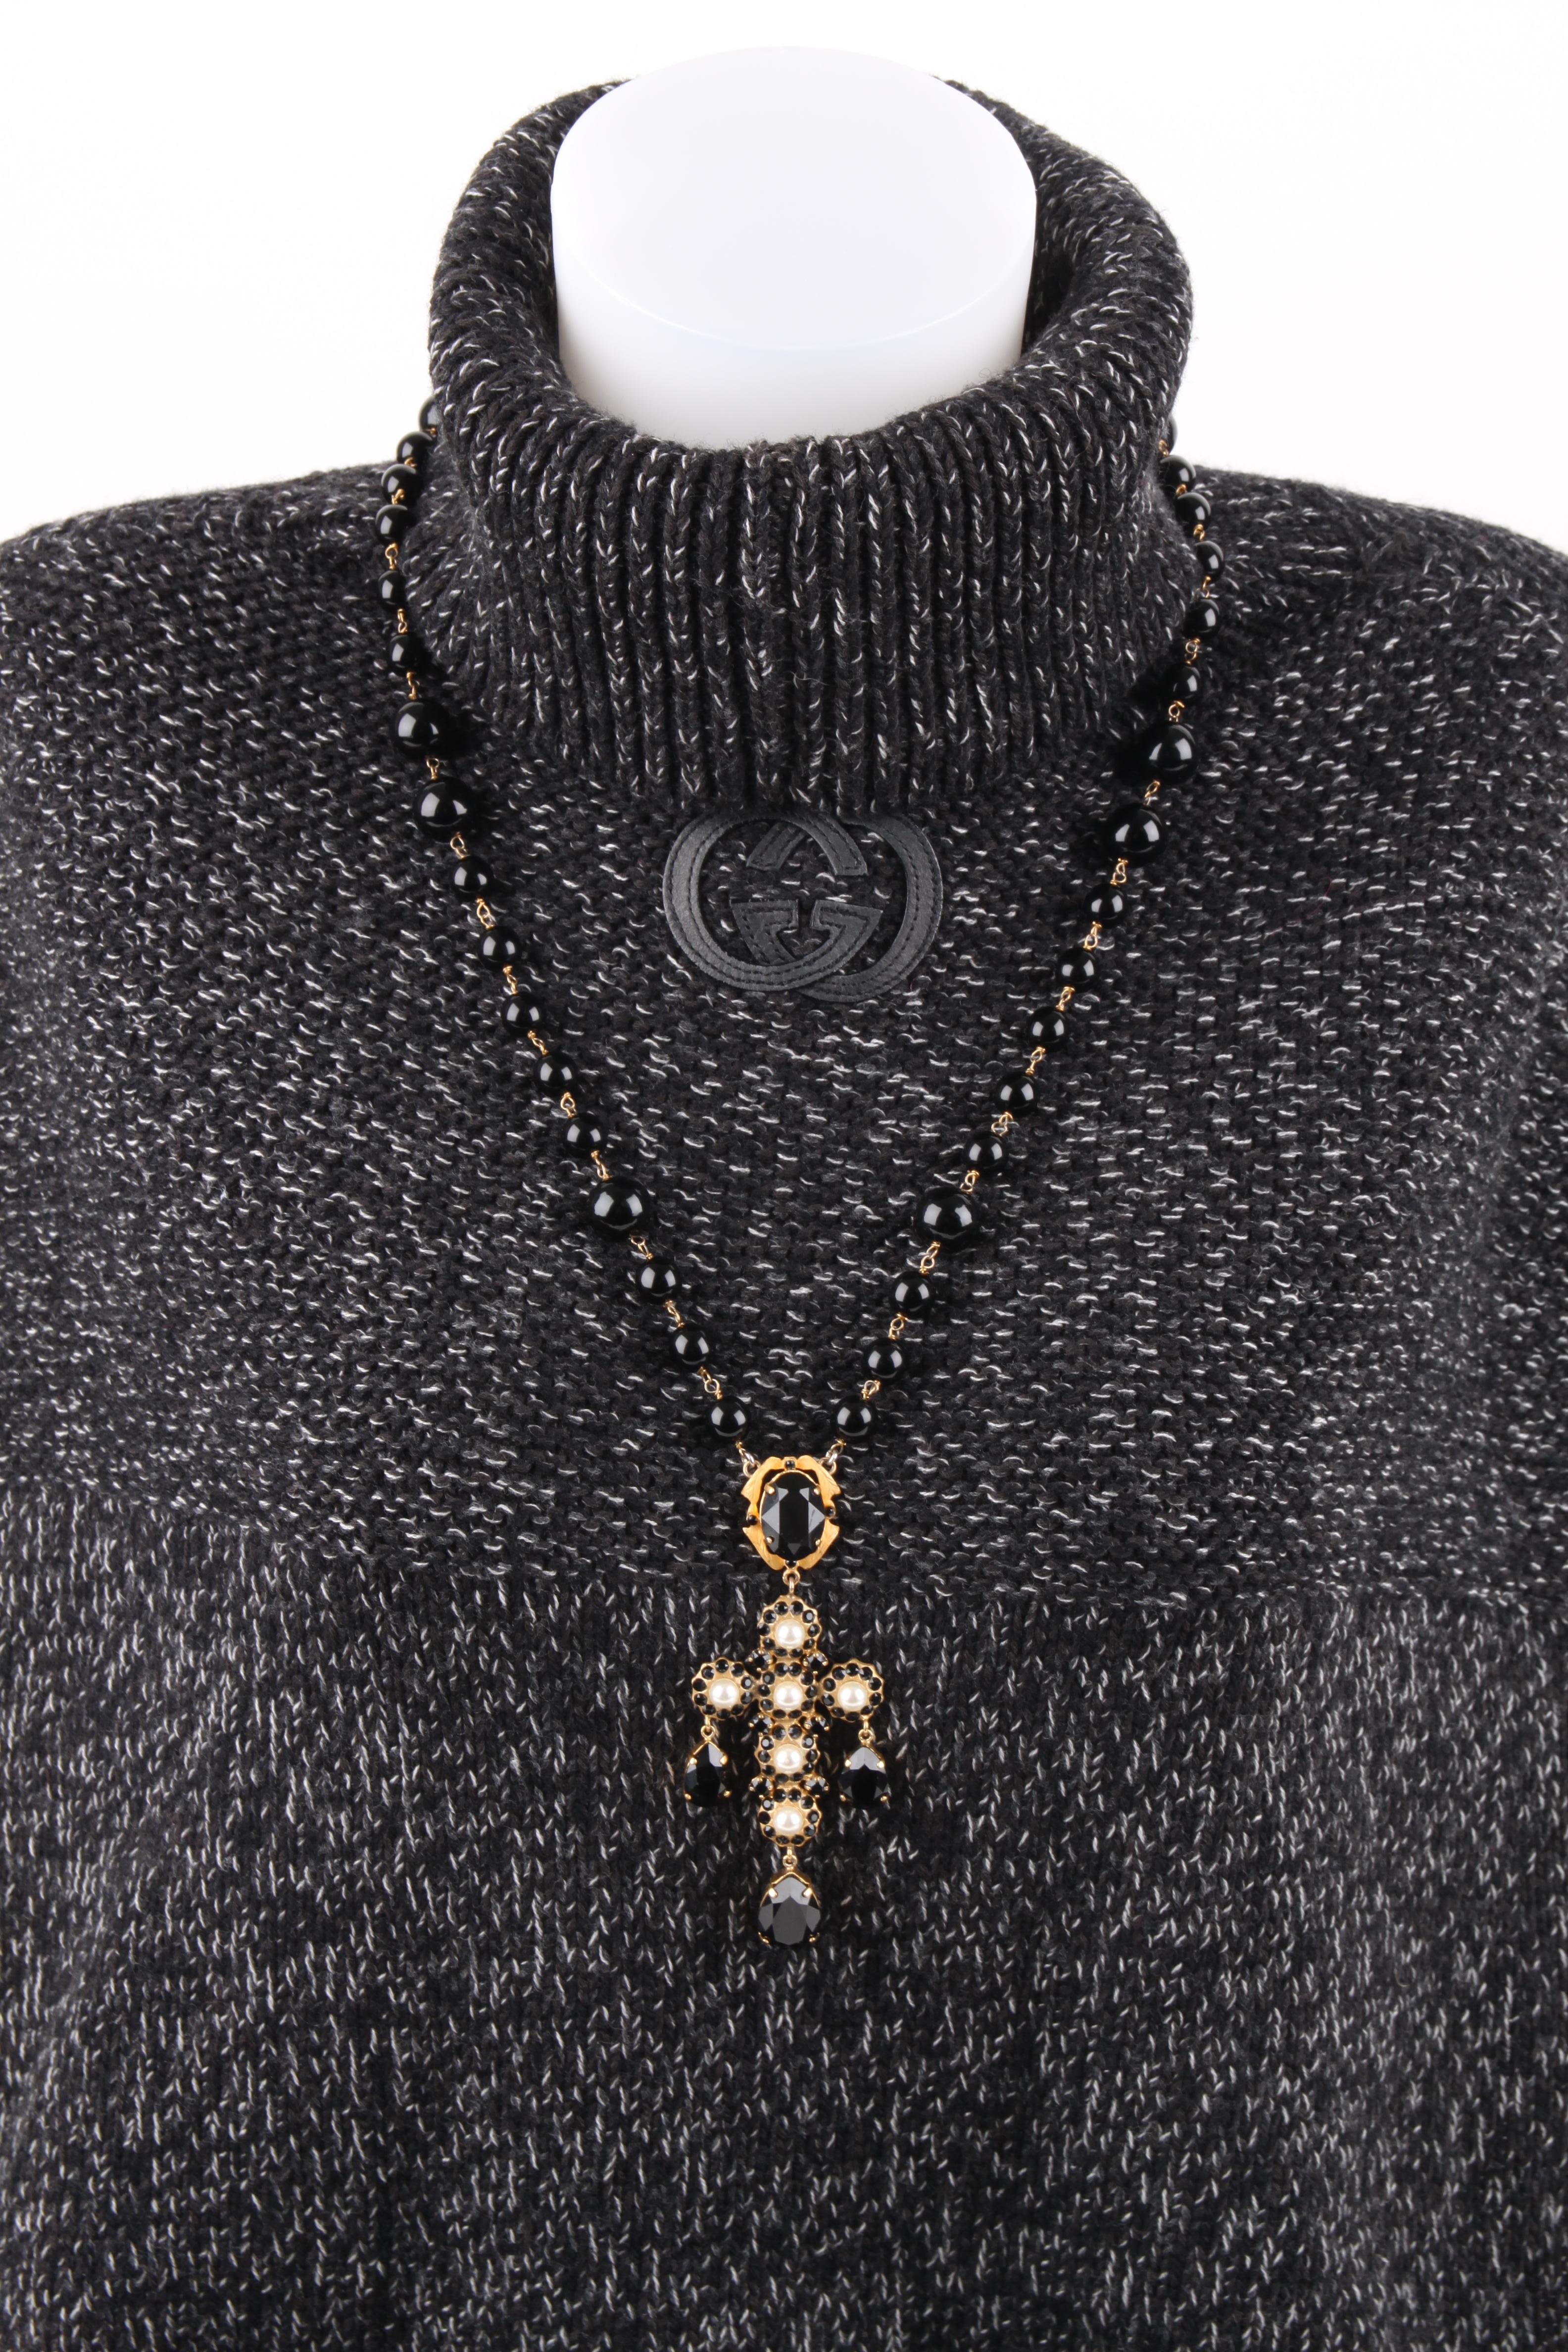 A wonderful long necklace by Dolce & Gabbana, we love the baroque feel!

The black beaded chain is 72 centimeters long, beads have different sizes. In the center a large gold-tone cross embellished with small black crystals and faux pearls.

The